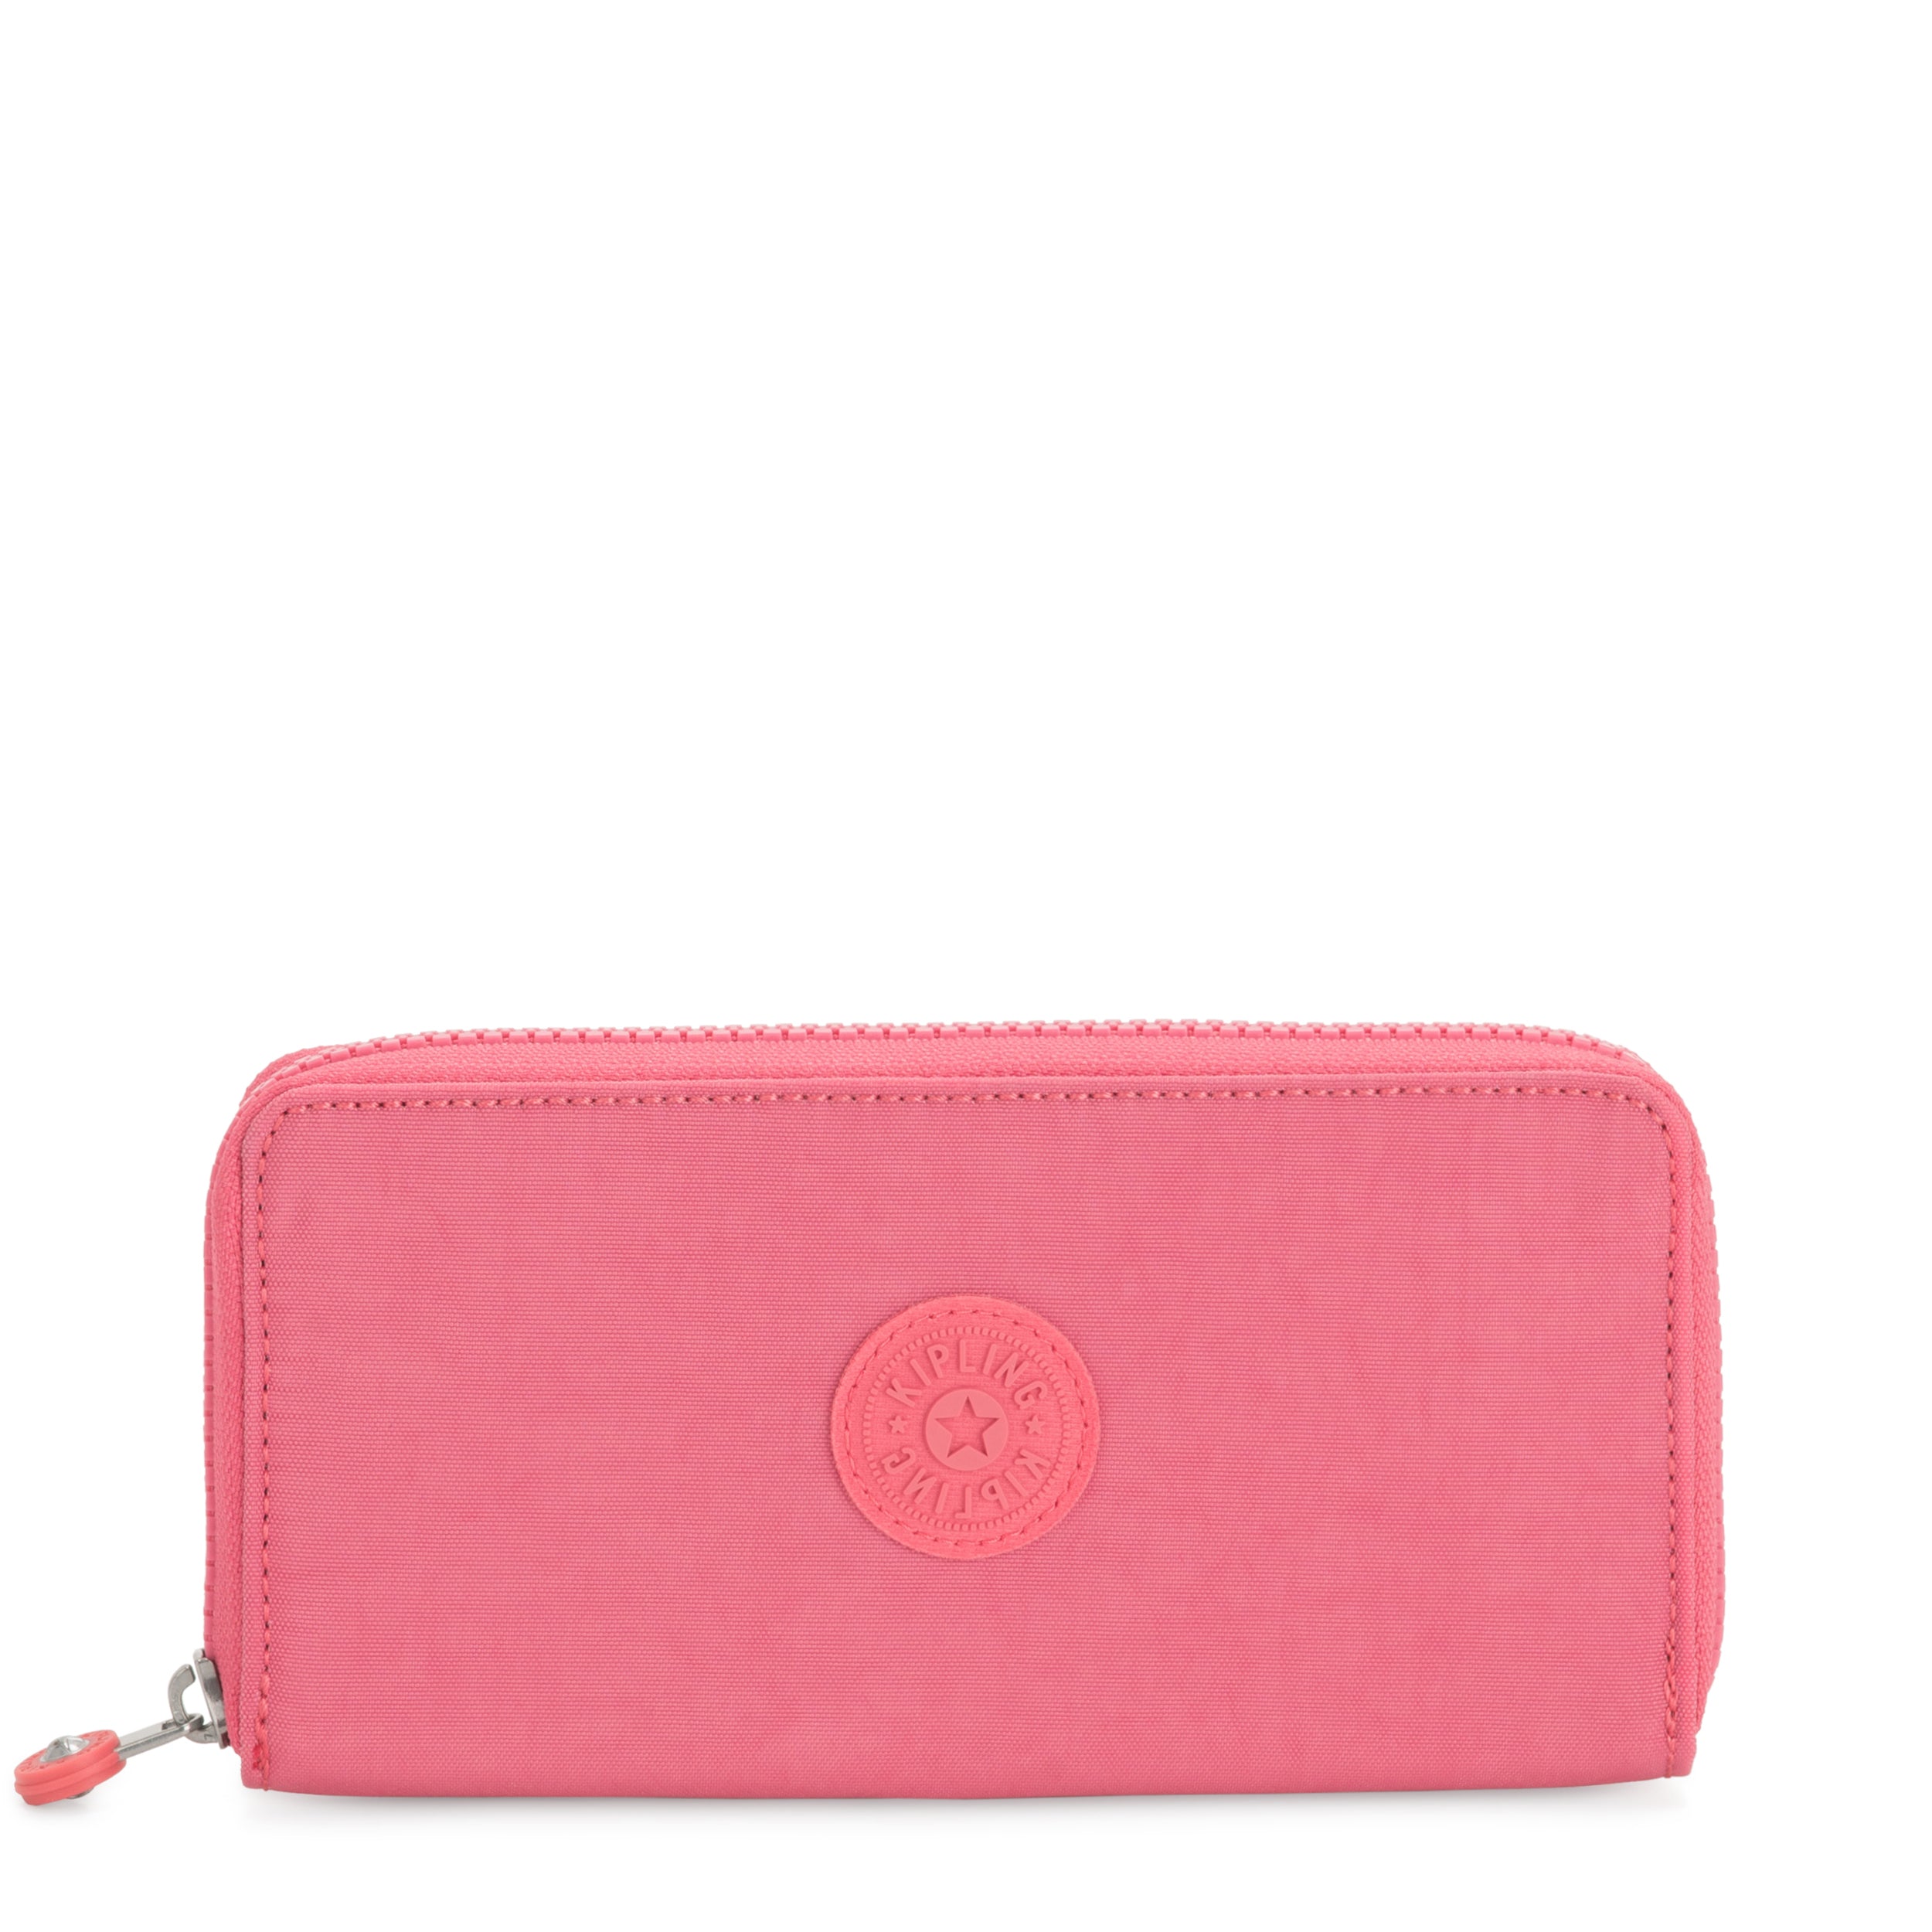 Kipling Creativity Large Pouch in Pink | Lyst UK